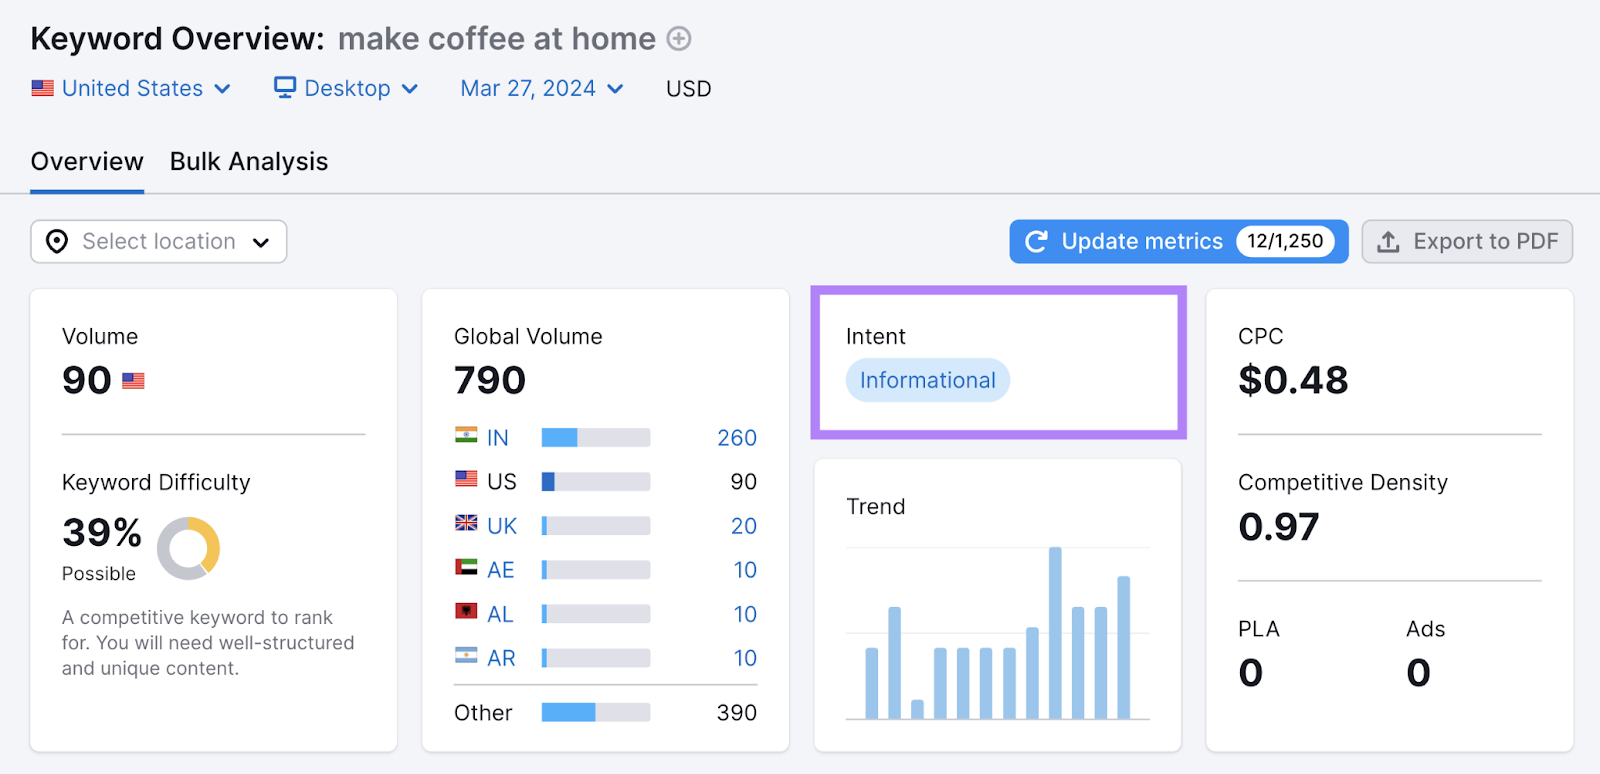 Keyword Overview dashboard with metrics s،wn for "make coffee at ،me" keyword